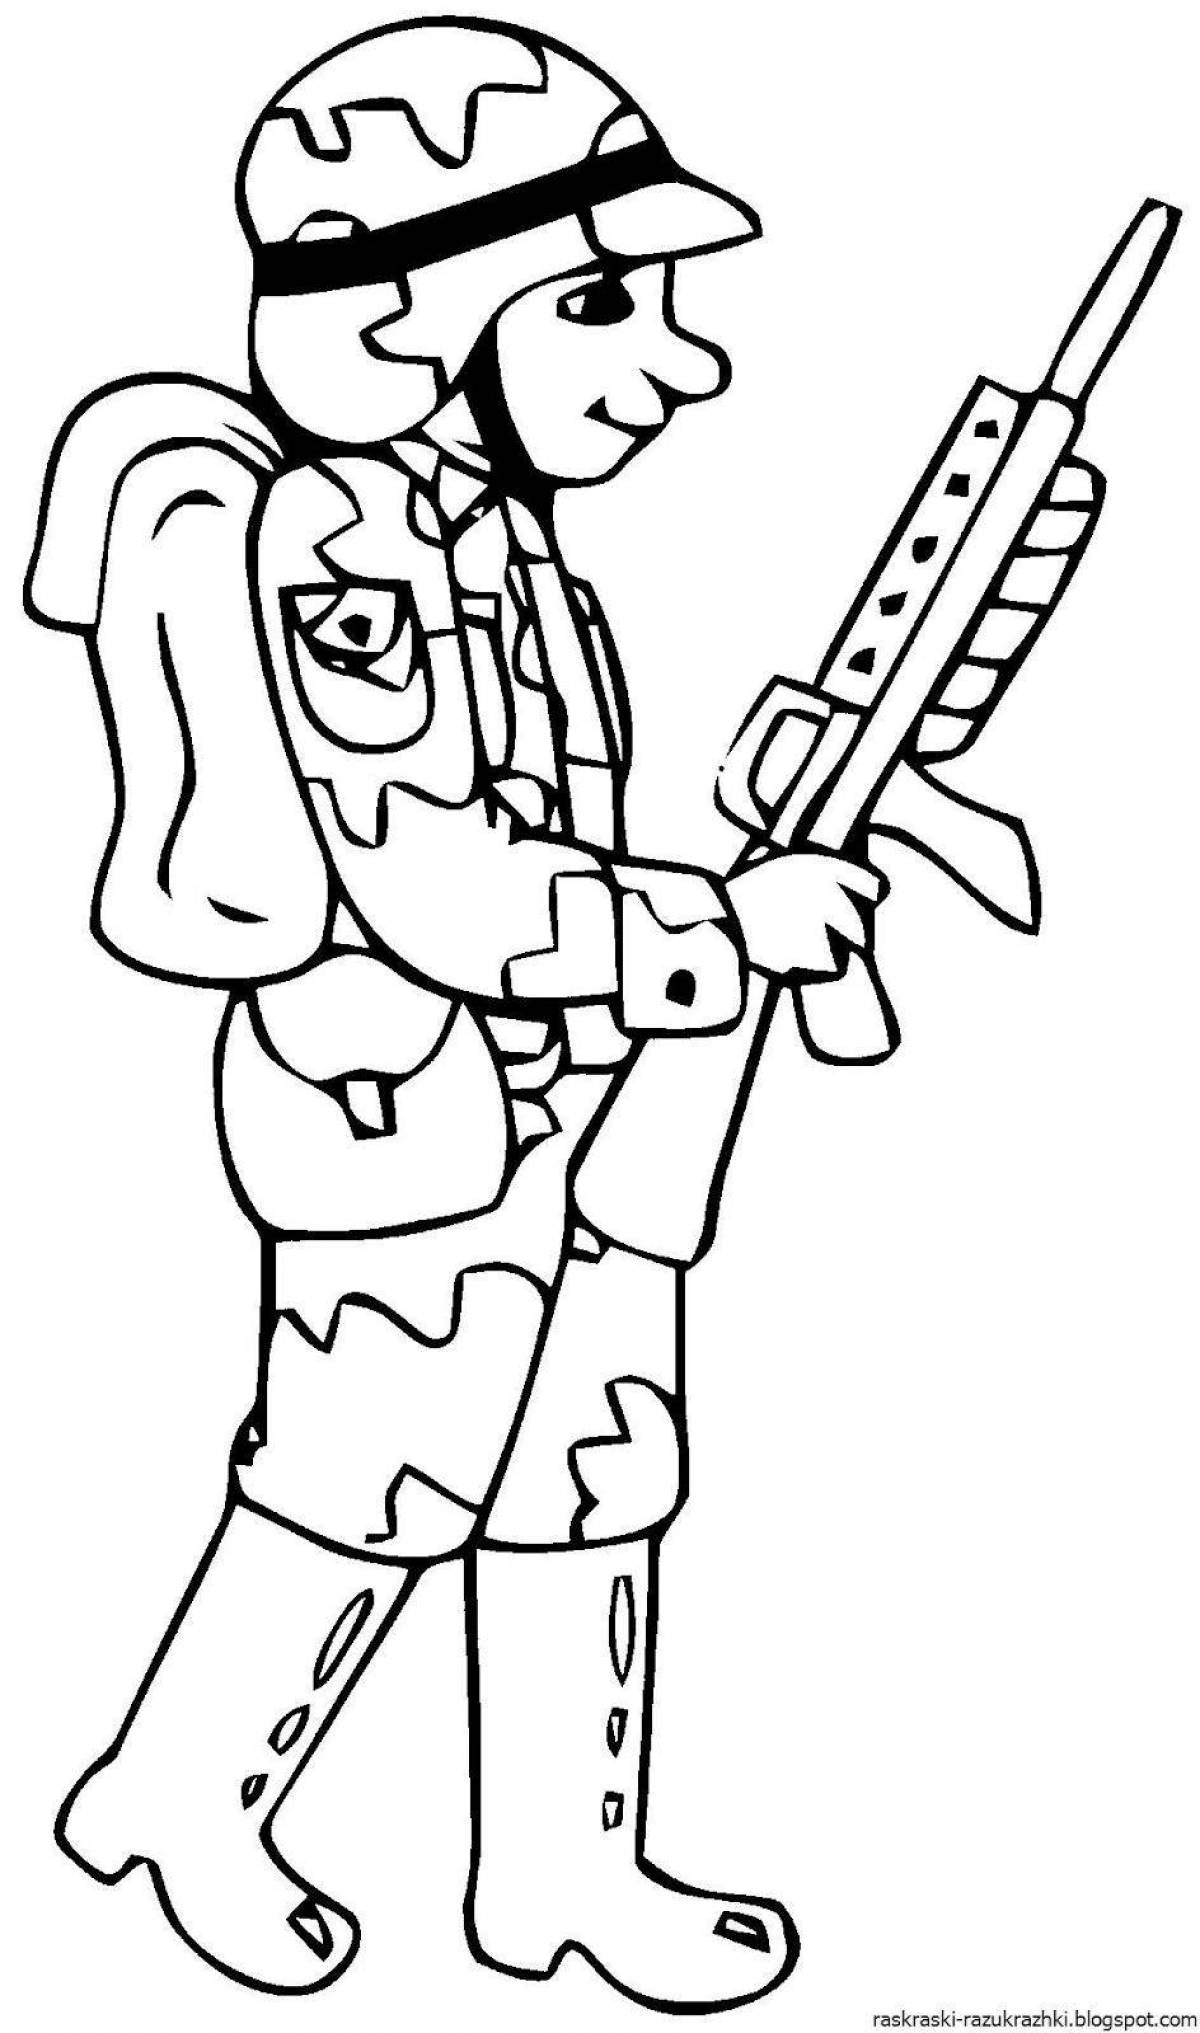 Coloring pages brave military soldiers for kids